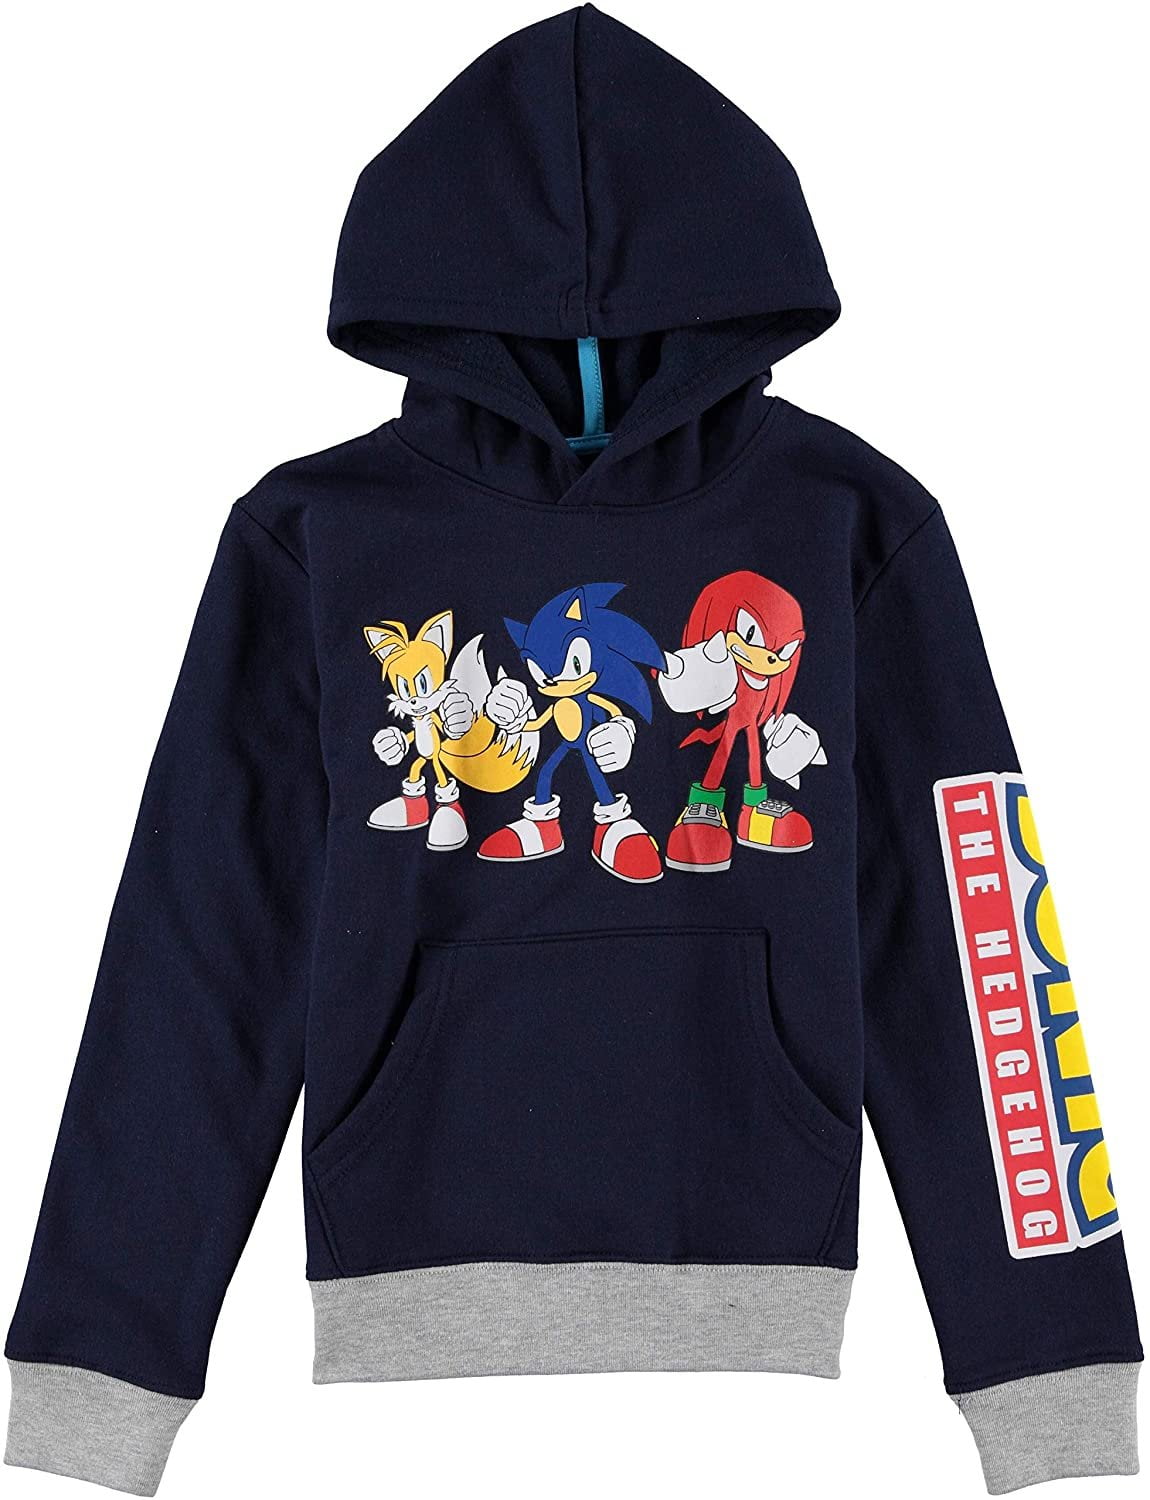 Sonic The Hedgehog Boys Graphic Hoodie 4-5, Navy 10-12, Navy Top and Jogger Pants 3-Piece Outfit Set